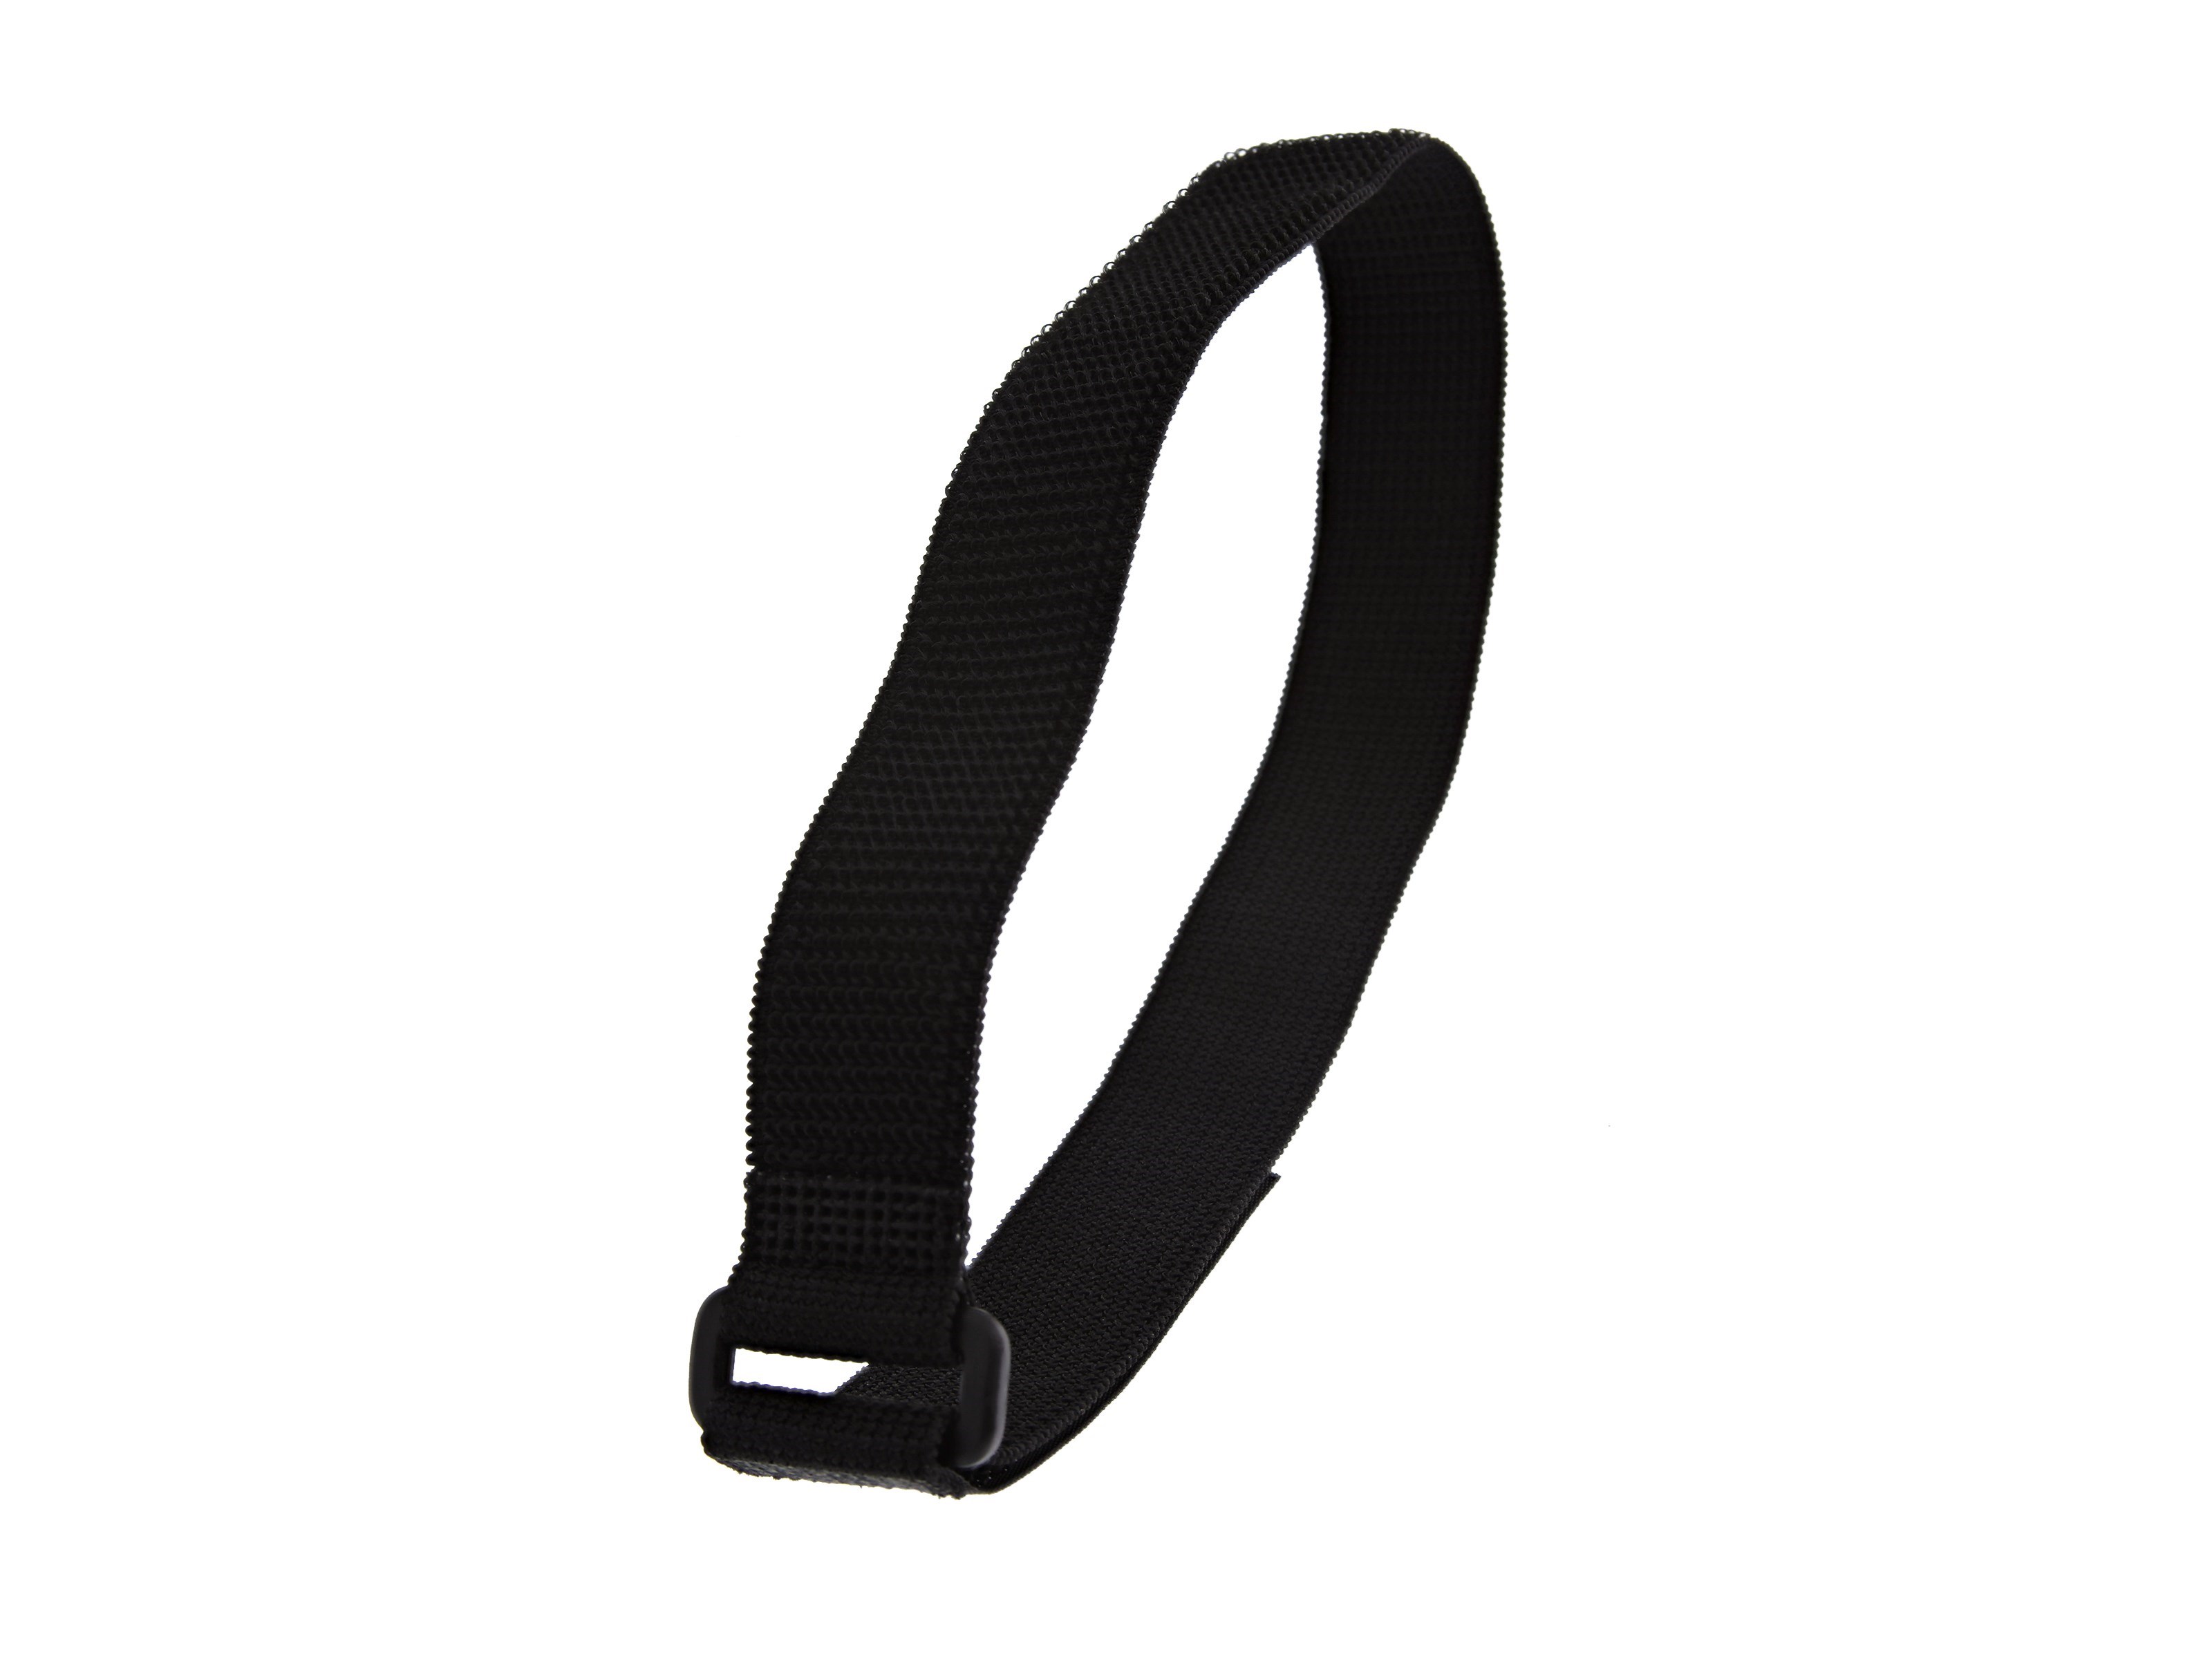 All Purpose Elastic Cinch Strap - 20 x 1 Inch - 5 Pack - Secure™ Cable Ties